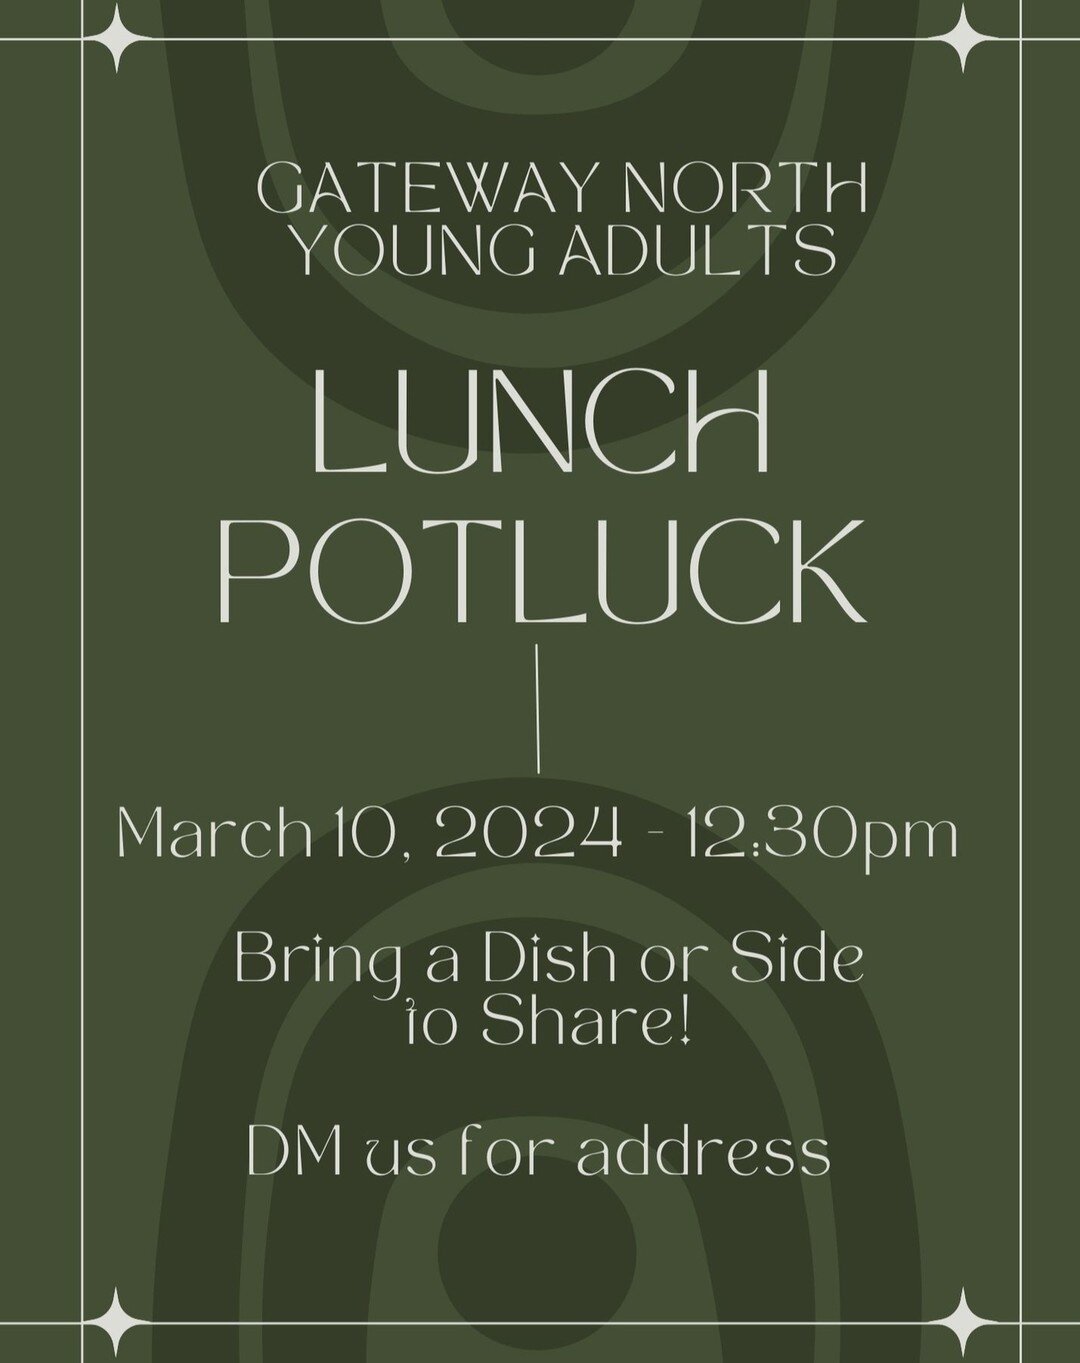 THIS SUNDAY...we will be having a LUNCH POTLUCK.

Bring a dish or side to share! 
DM us for the address :)